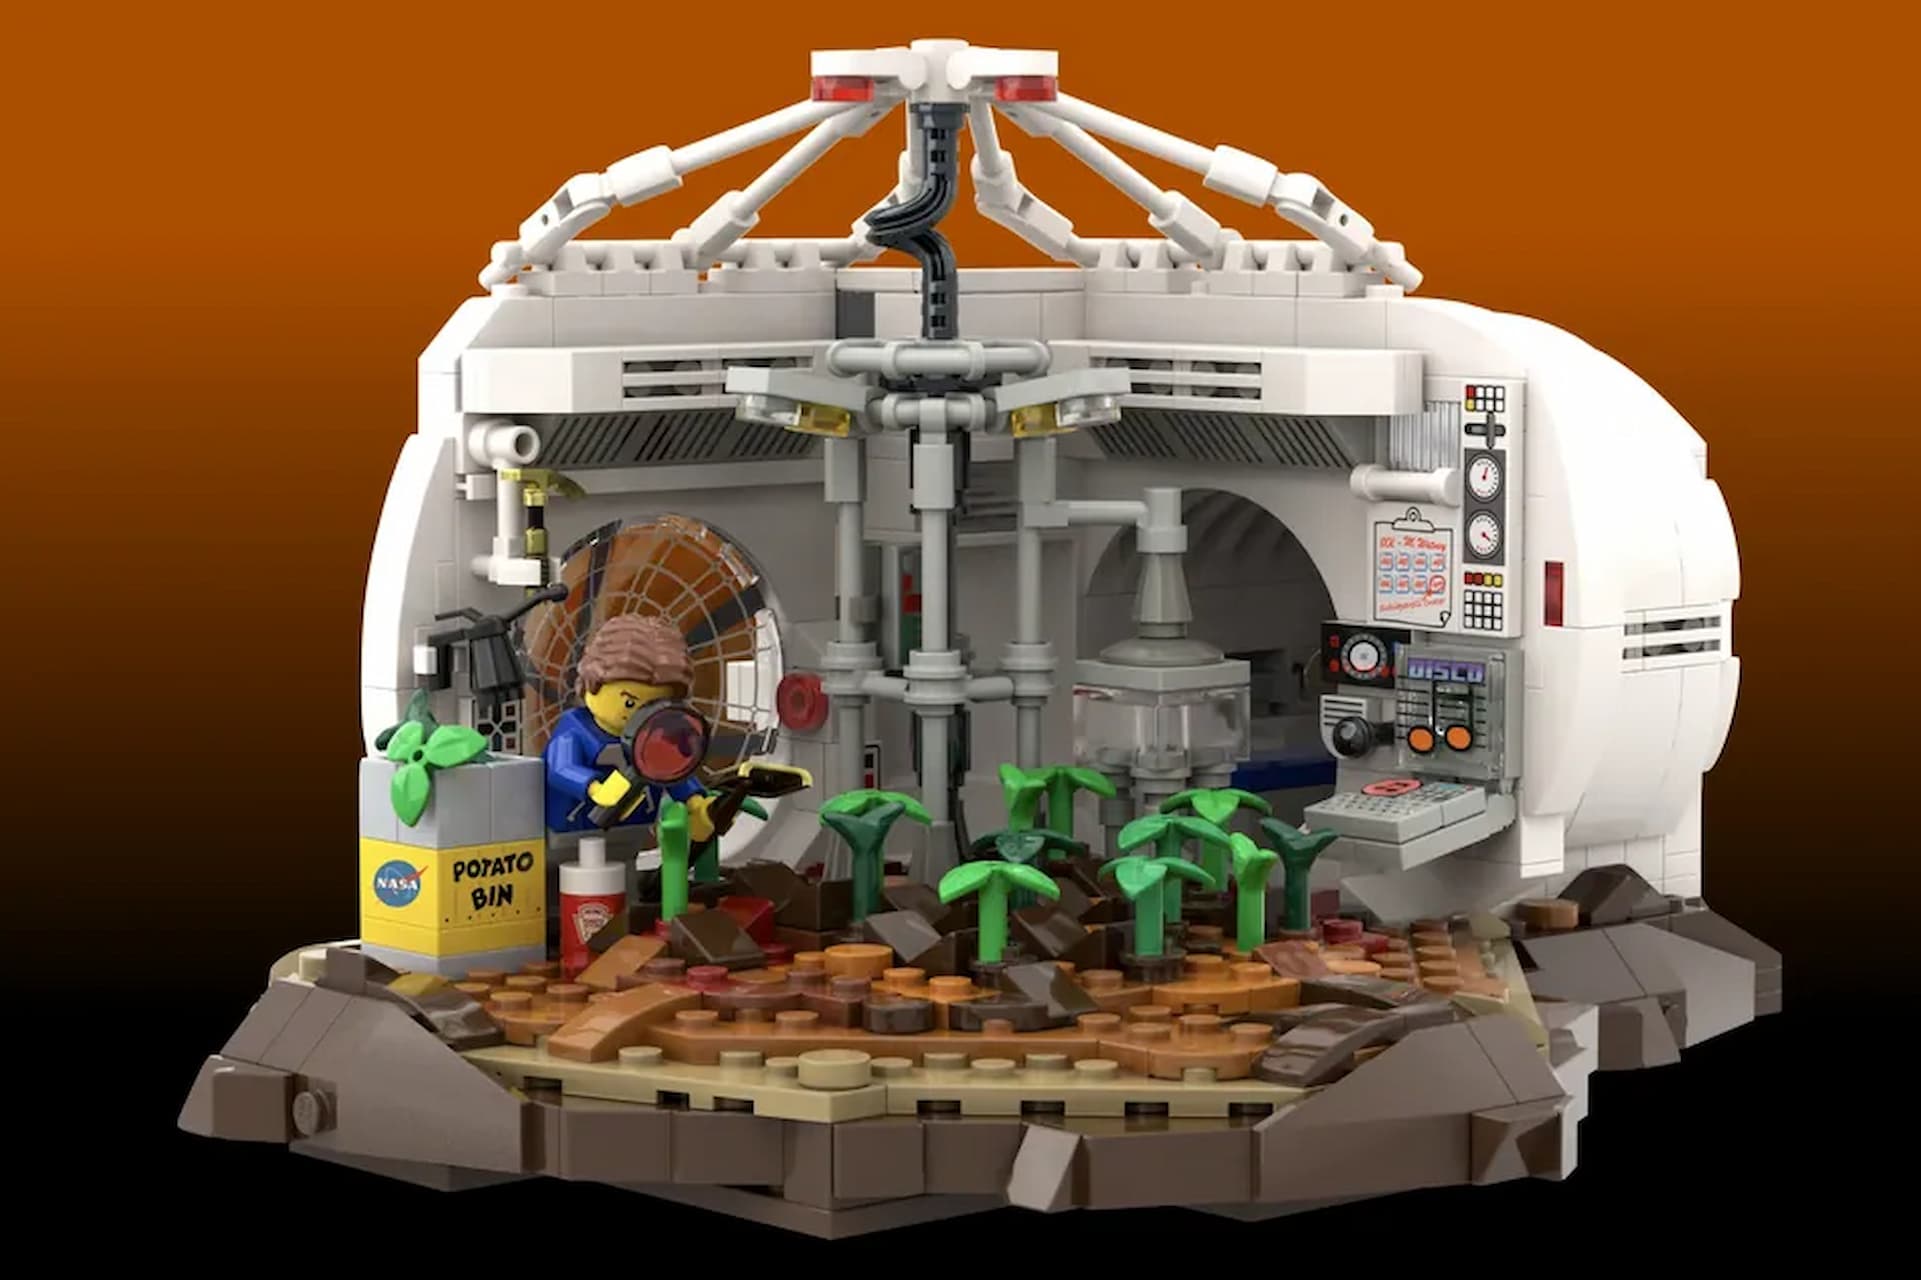 A concept image of the Lego Ideas The Martian submission